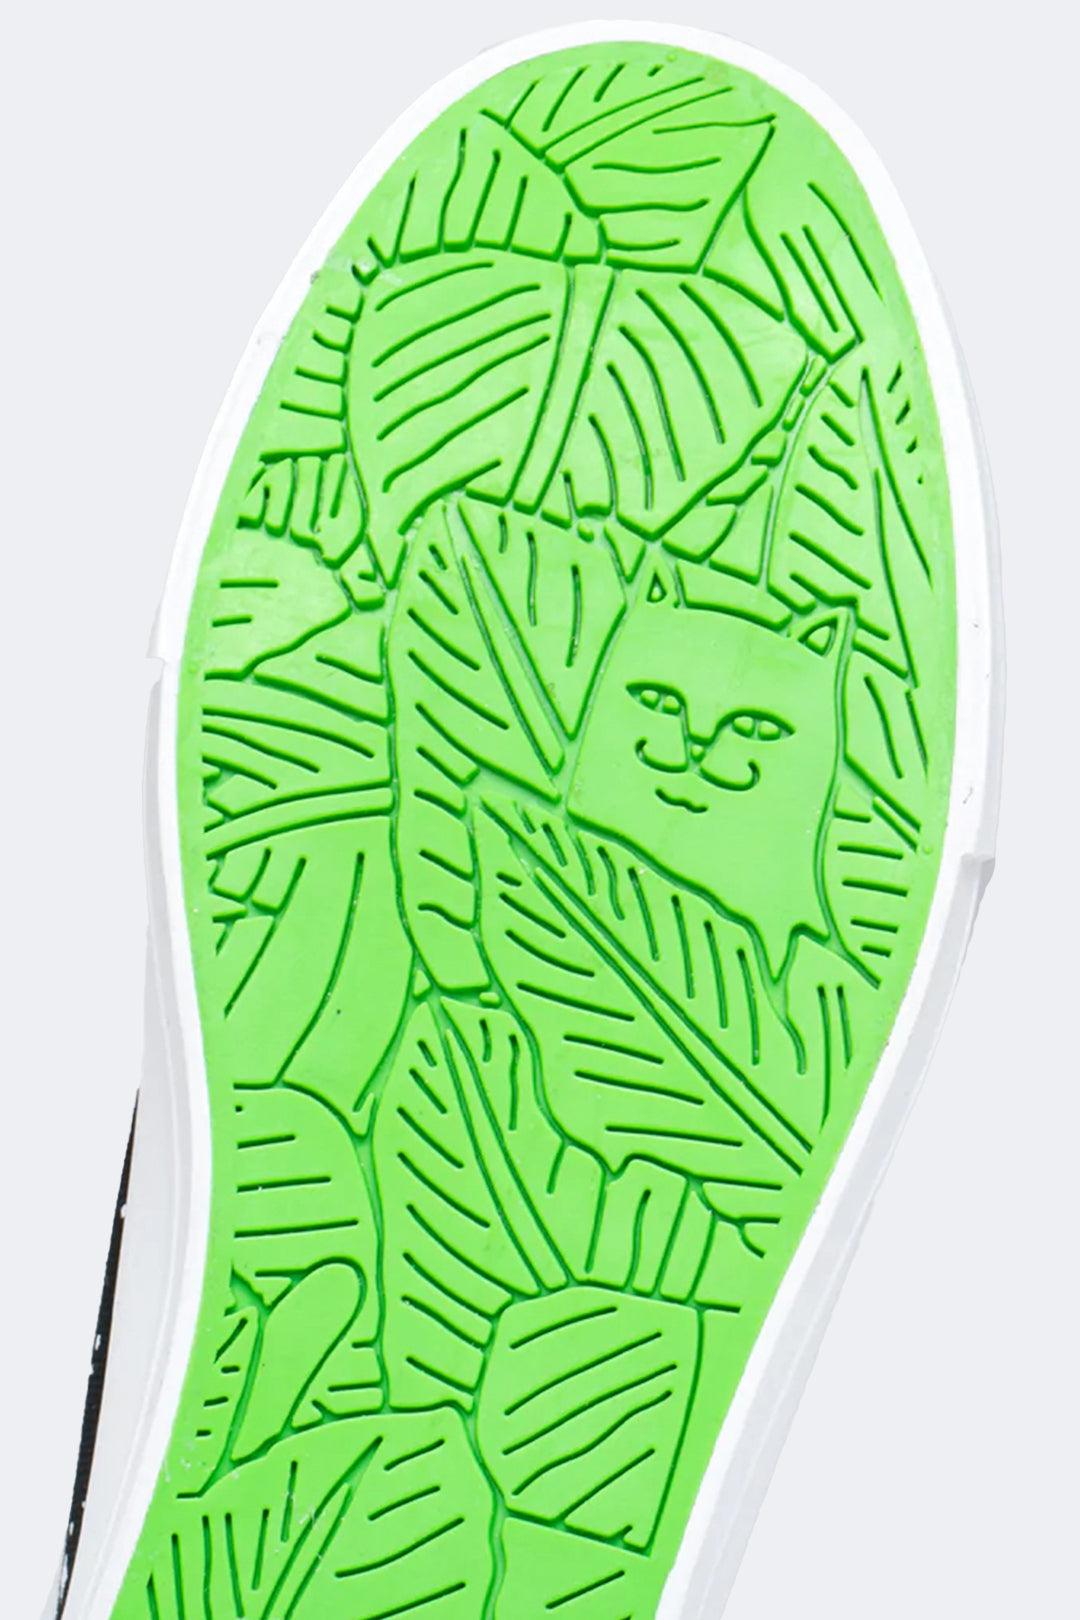 RIPNDIP TENIS WE OUT HERE - HYPE (7390764925095)